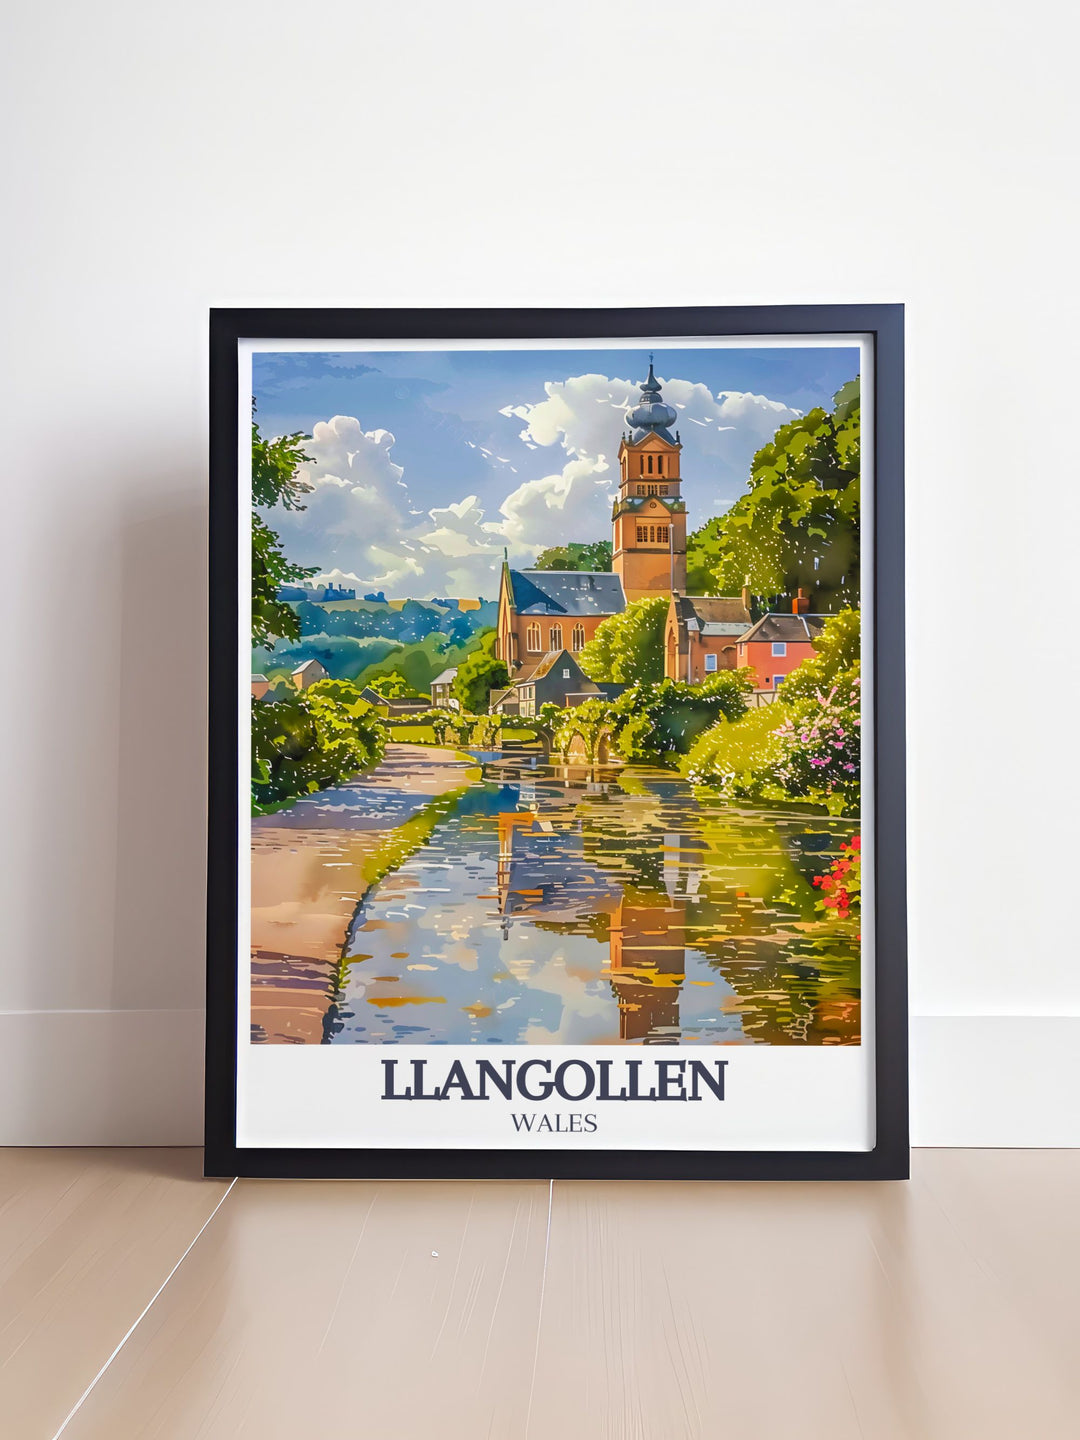 Experience the charm of Wales with this beautiful wall art showcasing the River Dee Llangollen Canal and Llangollen Methodist Church. Ideal for travel gifts or home decor this poster captures the timeless elegance of Llangollen in a vibrant and captivating illustration.